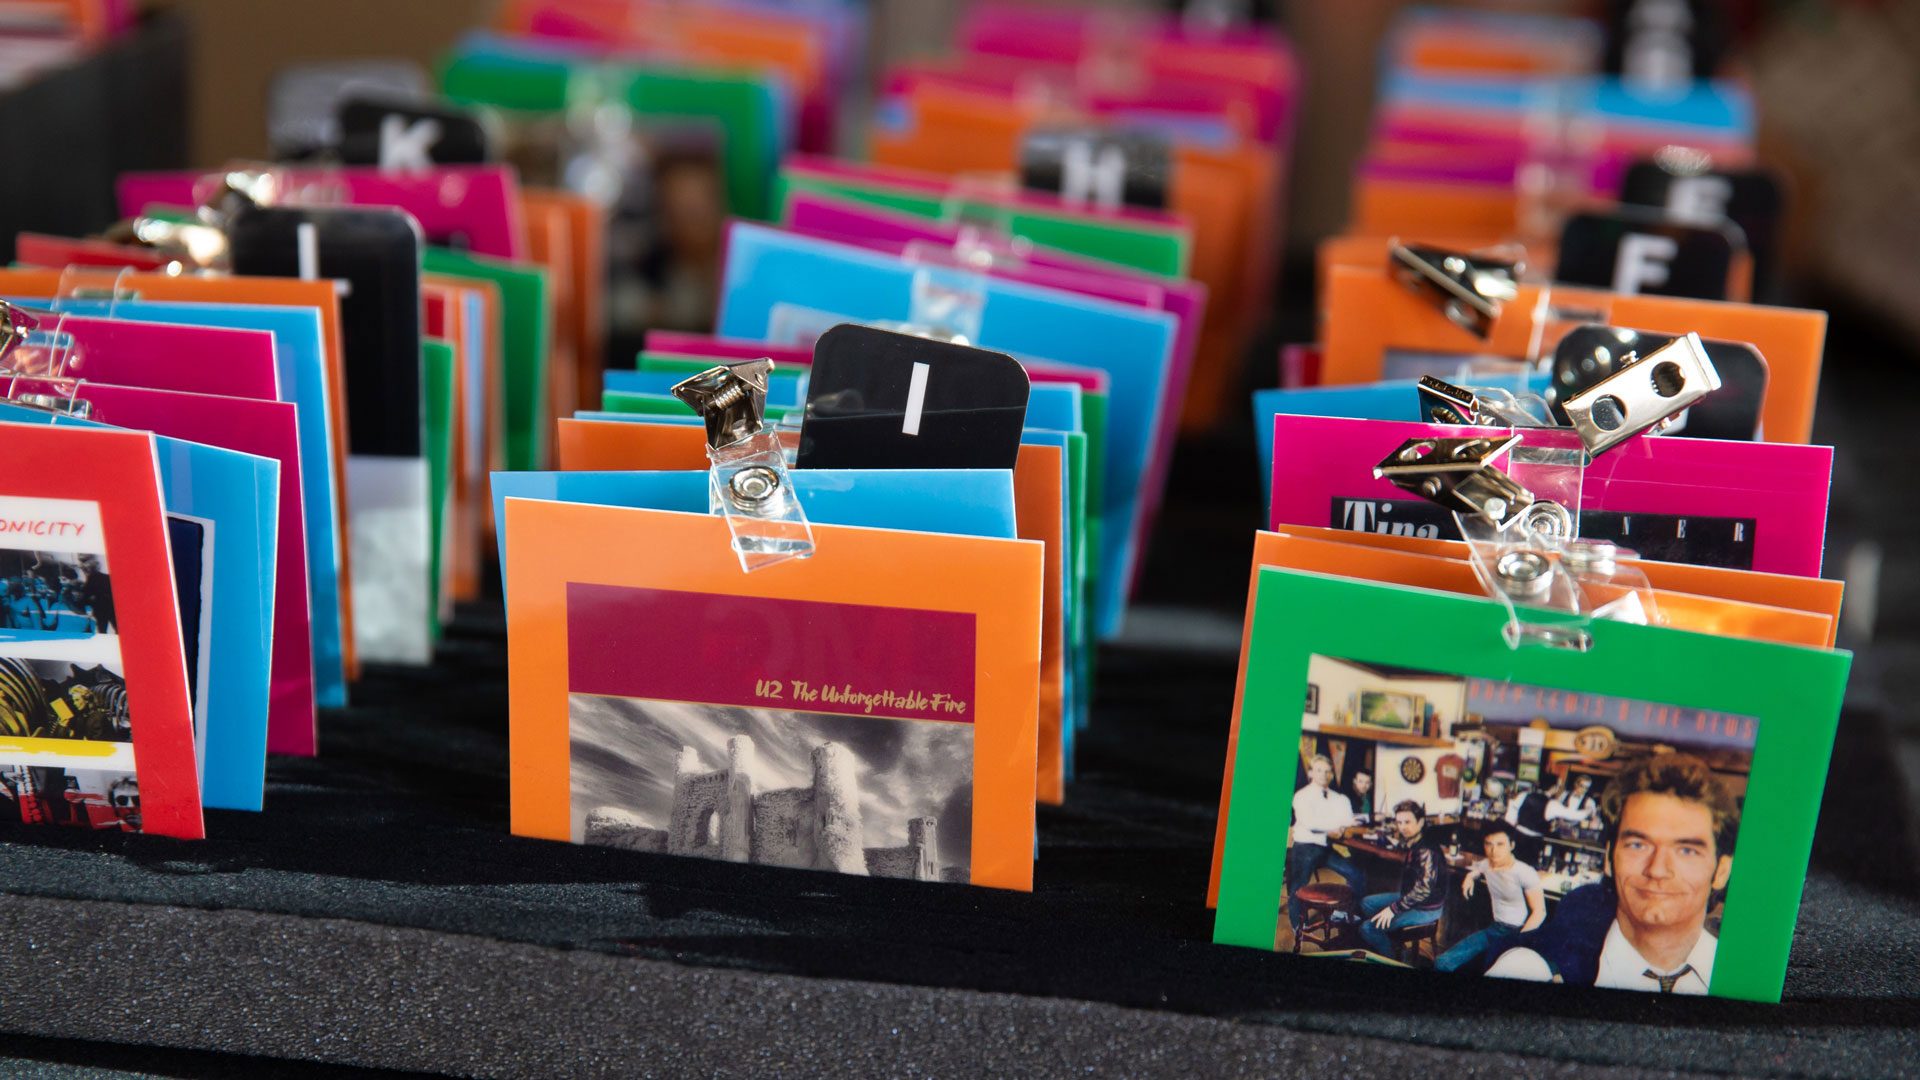 Reverse angle of name tags showing colorful back panels with 1980s album cover artwork